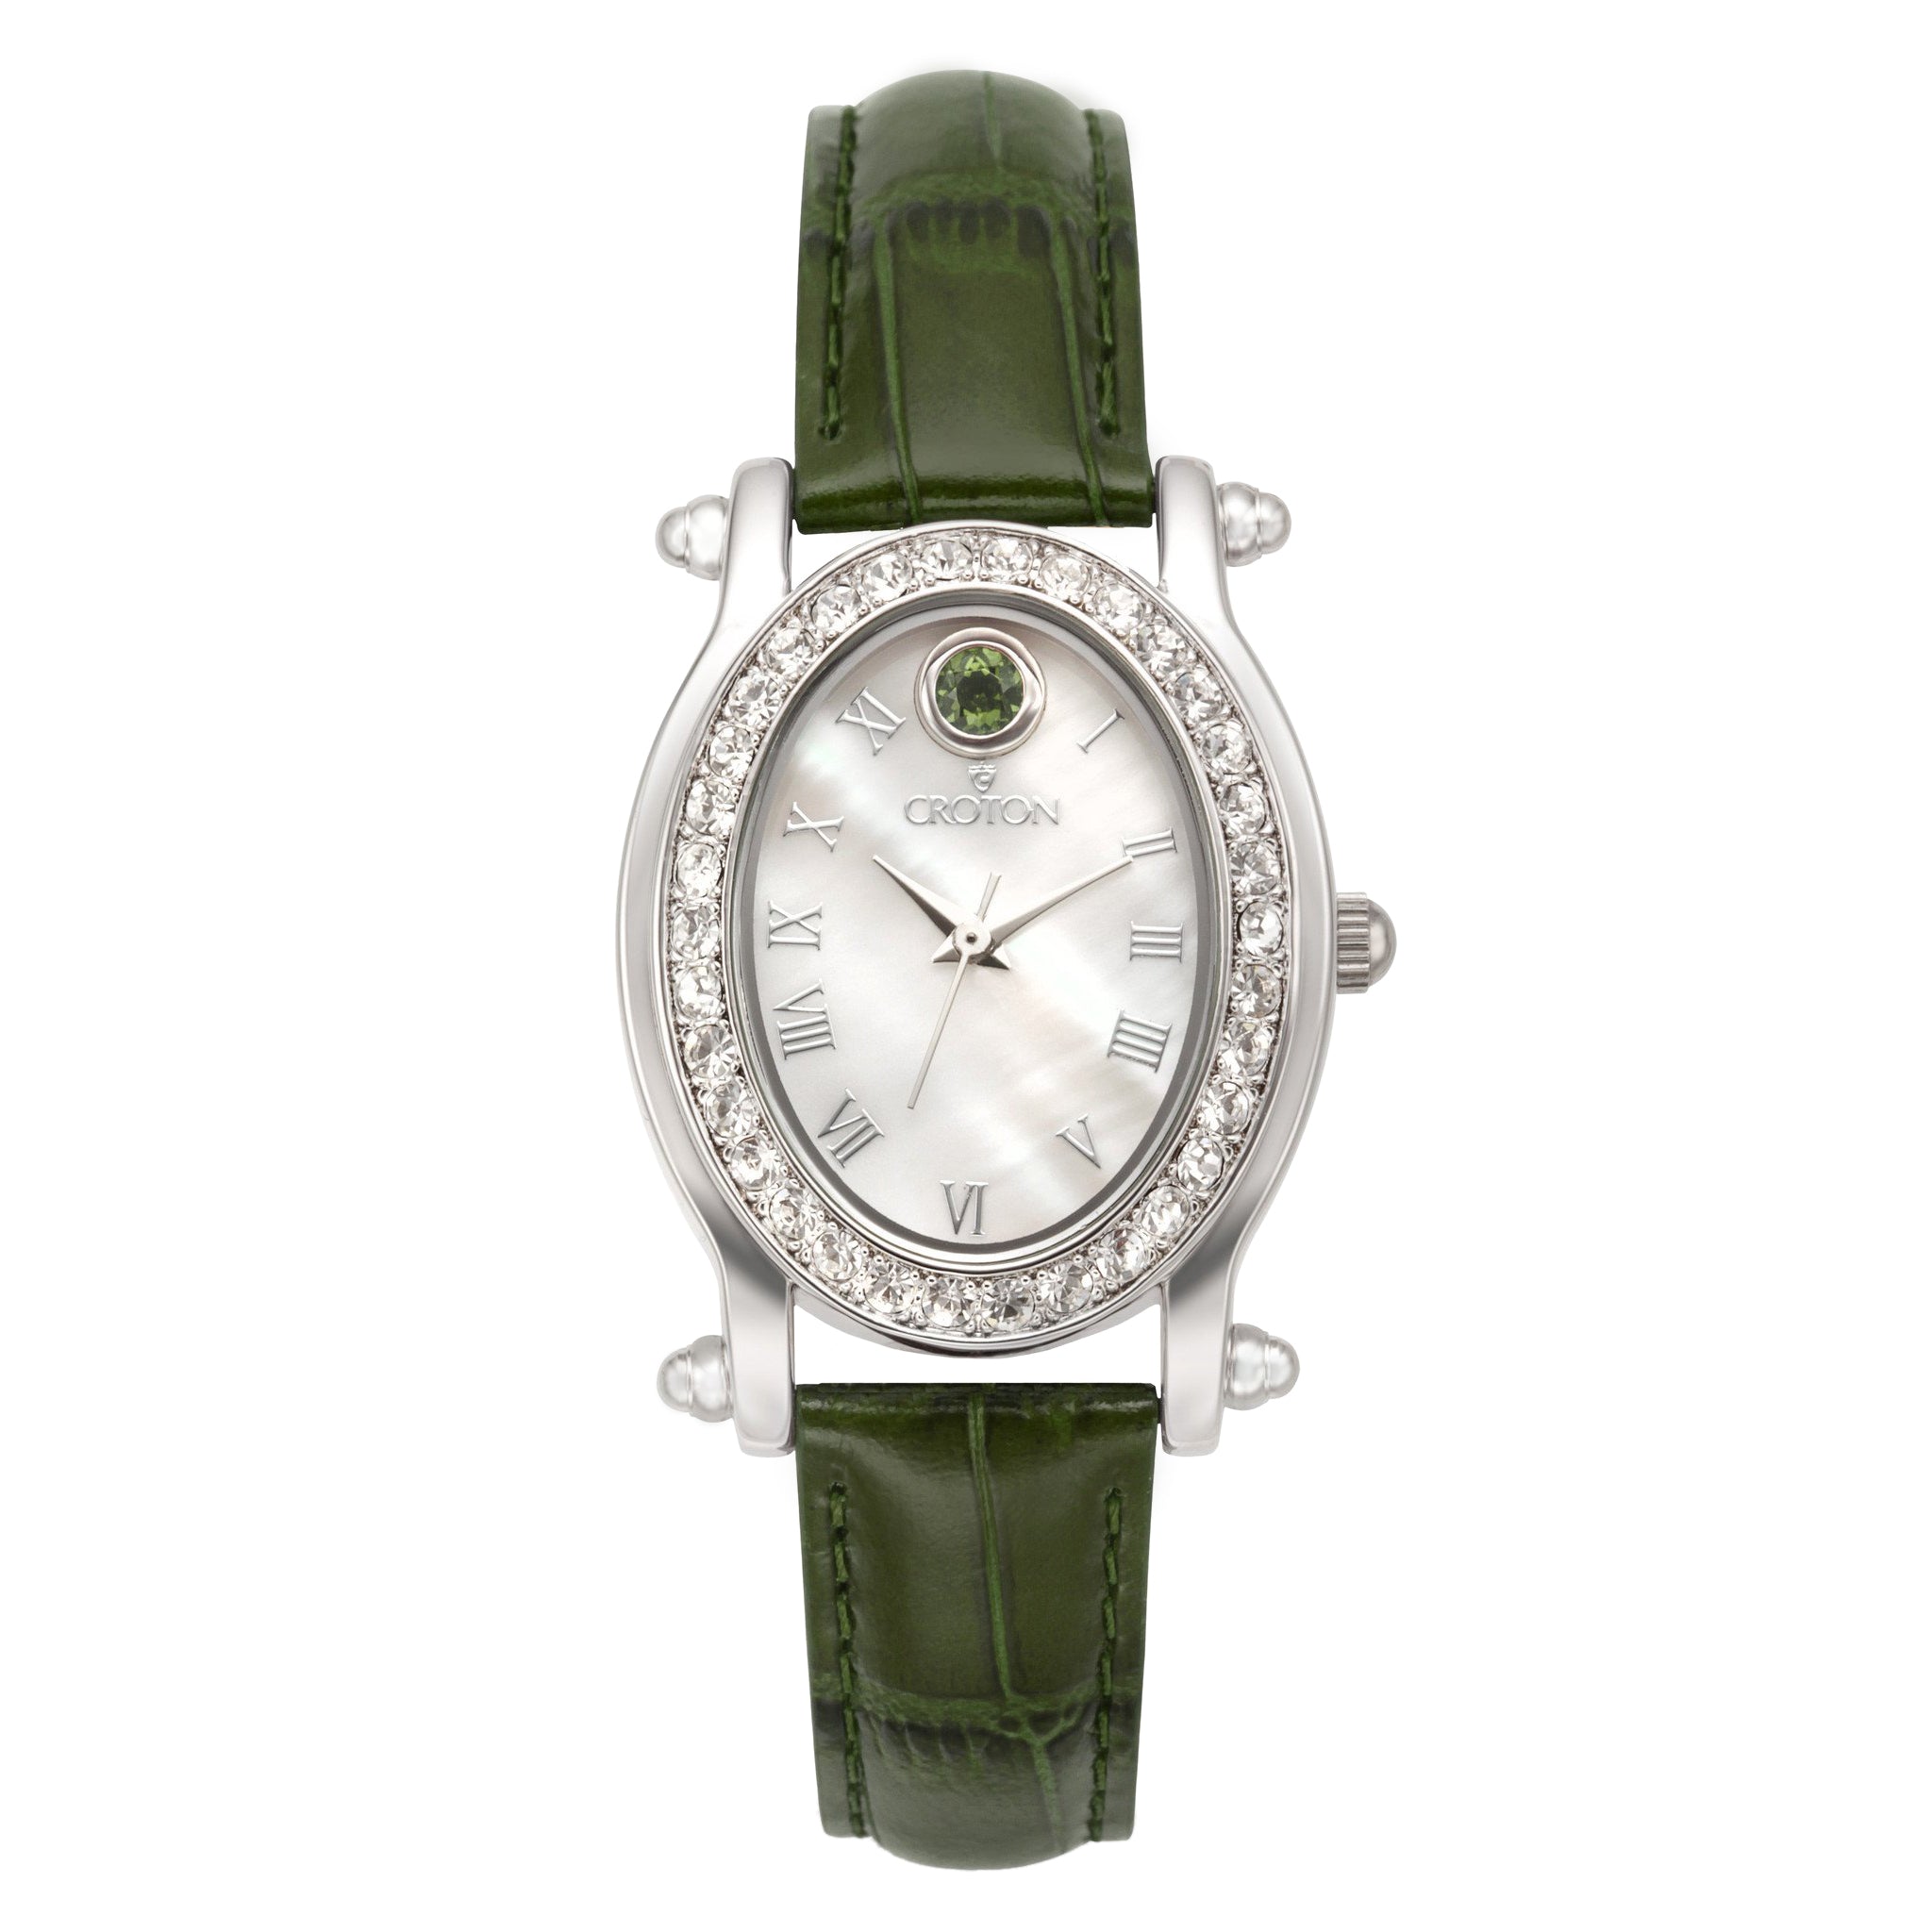 Croton Ladies "Ballroom" Birthstone Watch with Mother of Pearl Dial